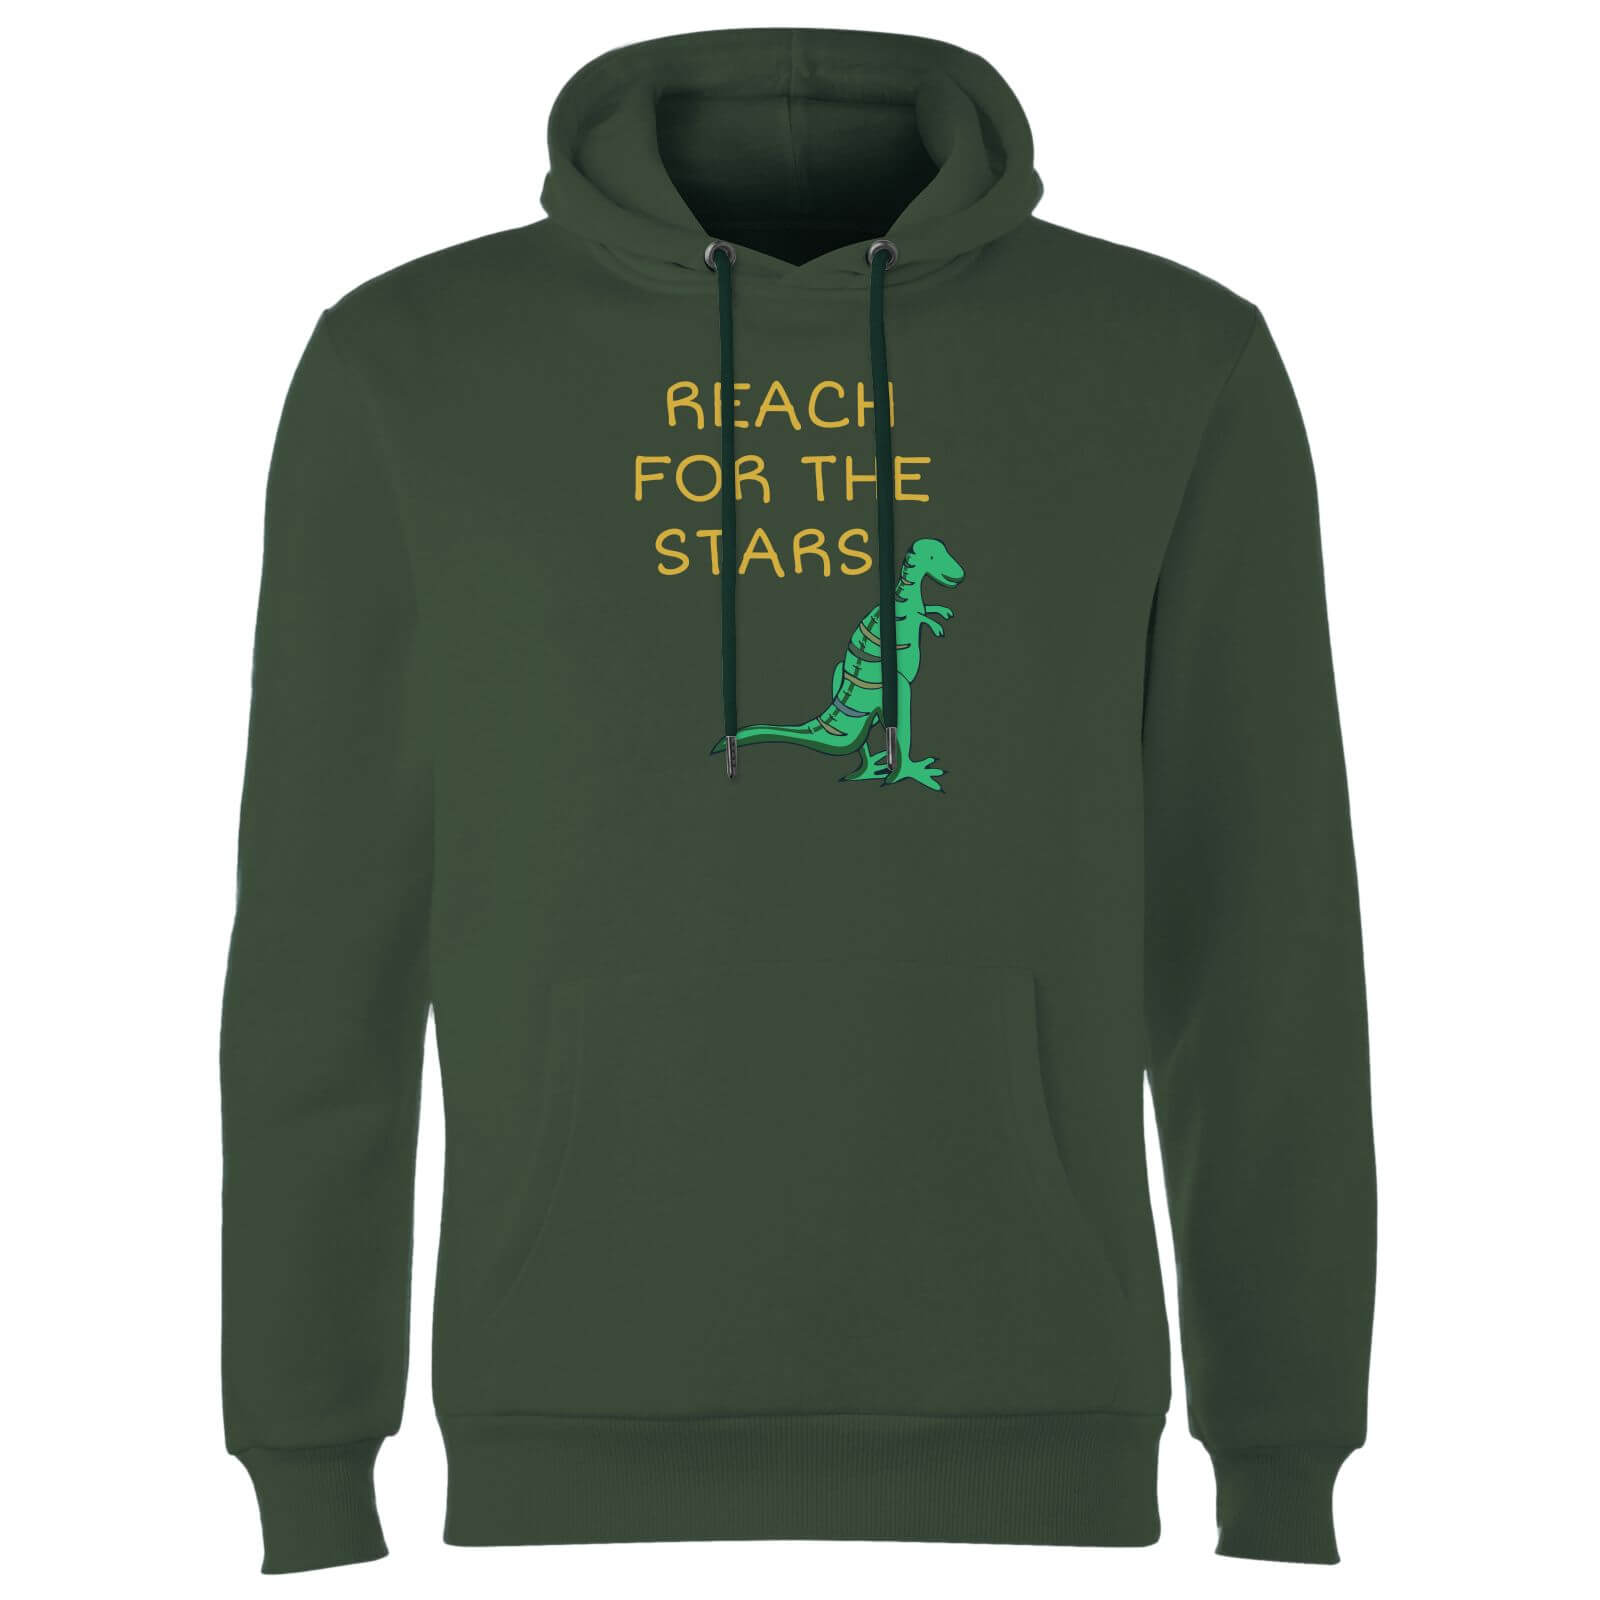 Reach For The Stars Hoodie - Forest Green - S - Forest Green